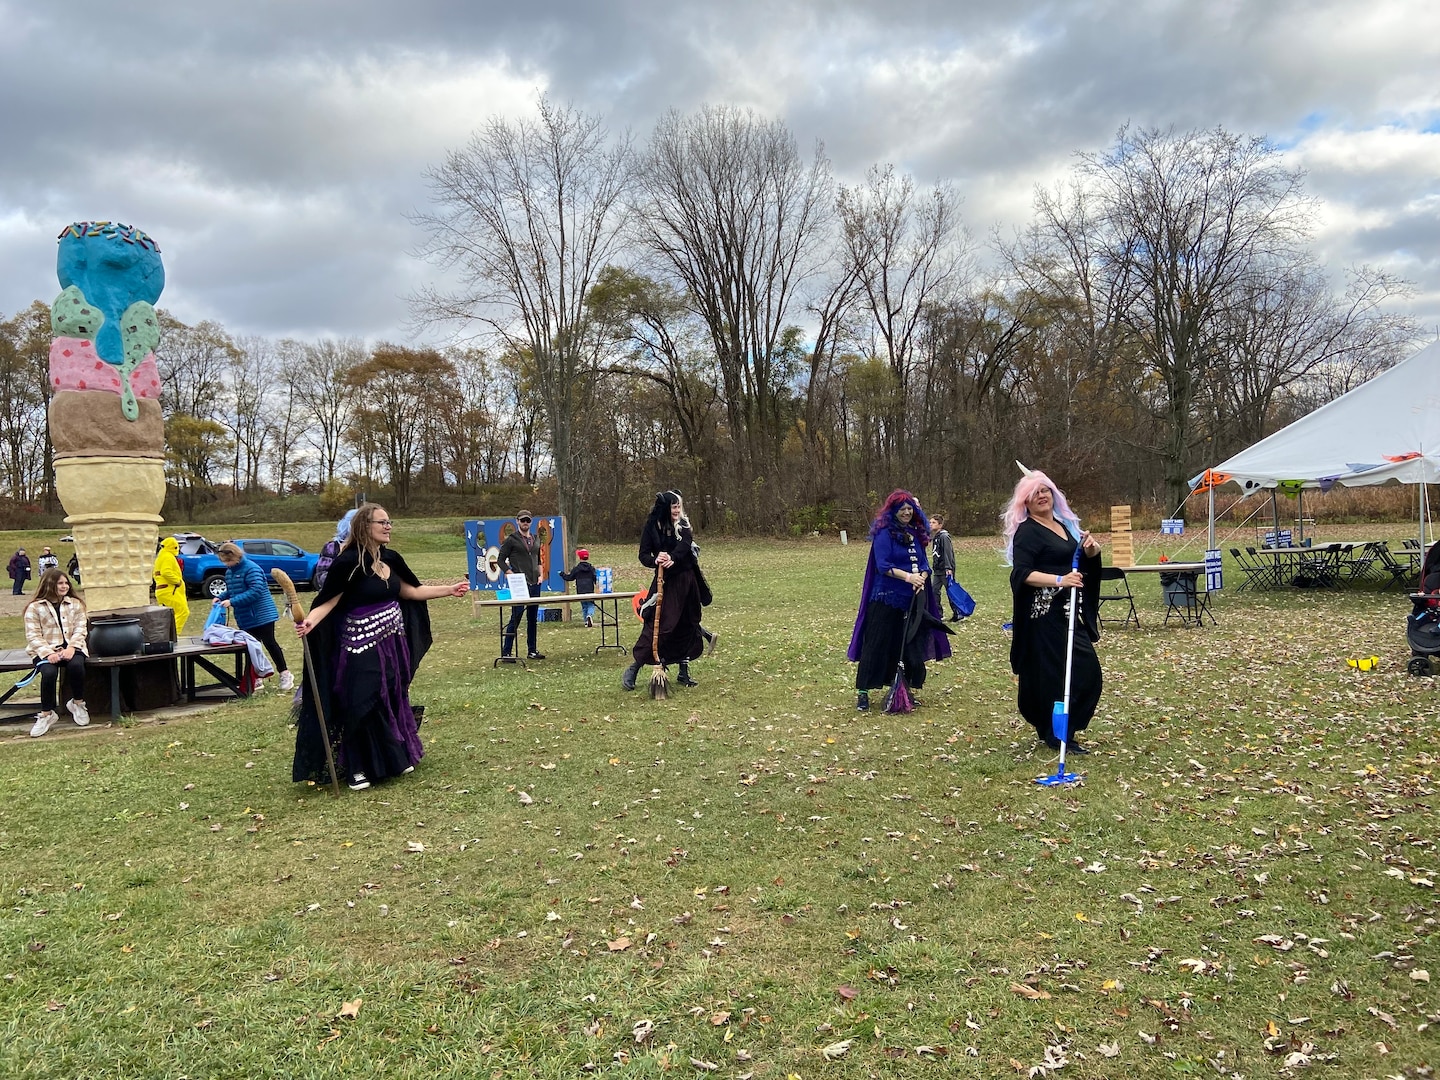 Group dressed as witches dancing with brooms.